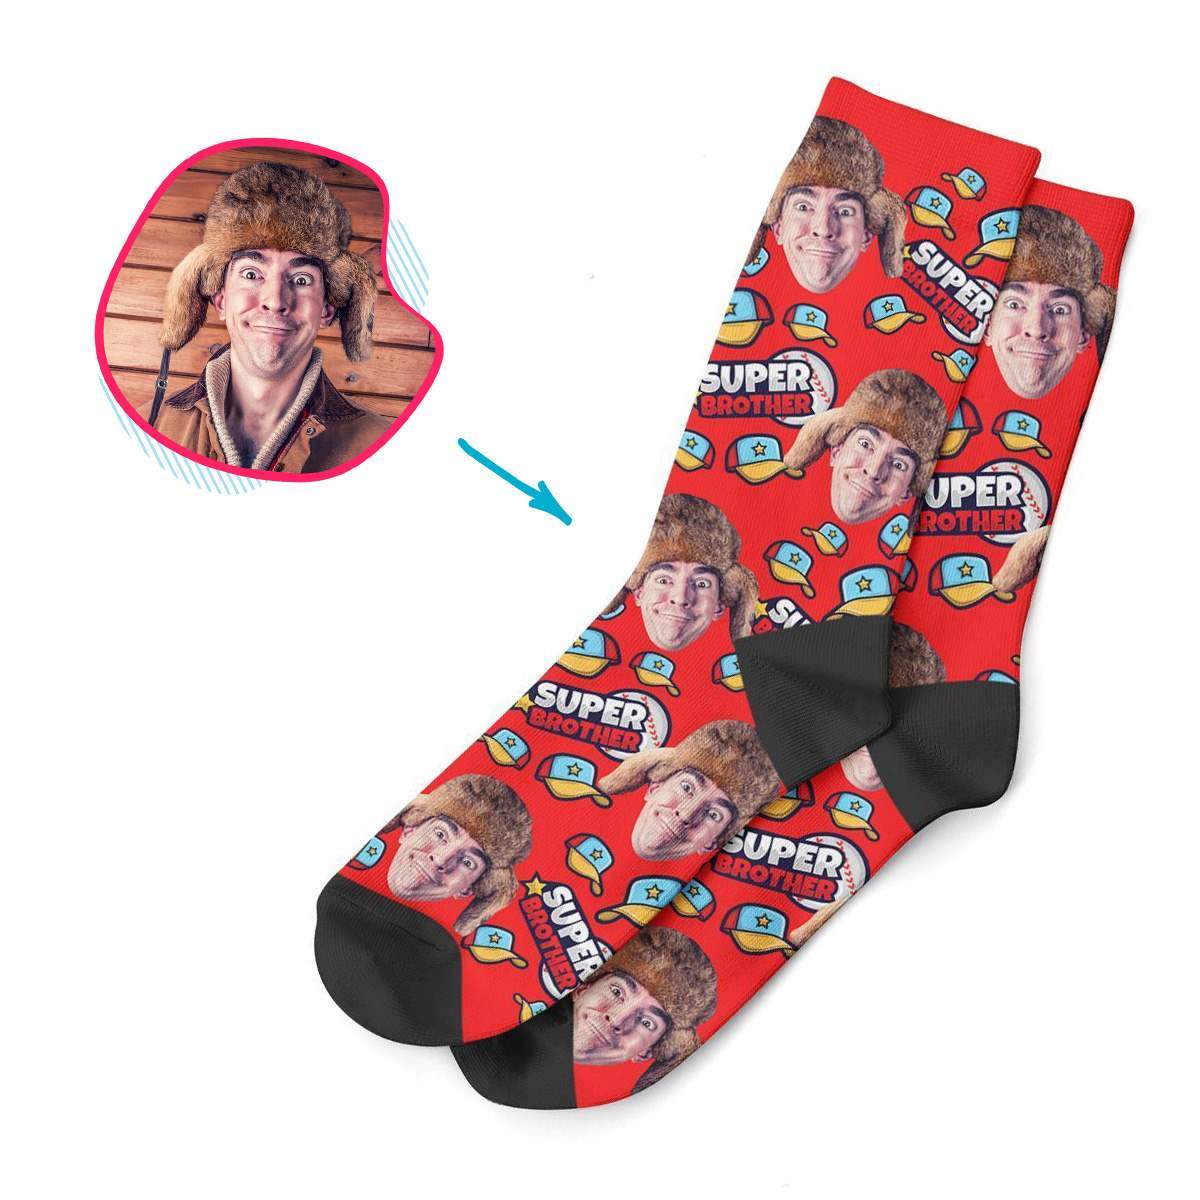 red Super Brother socks personalized with photo of face printed on them